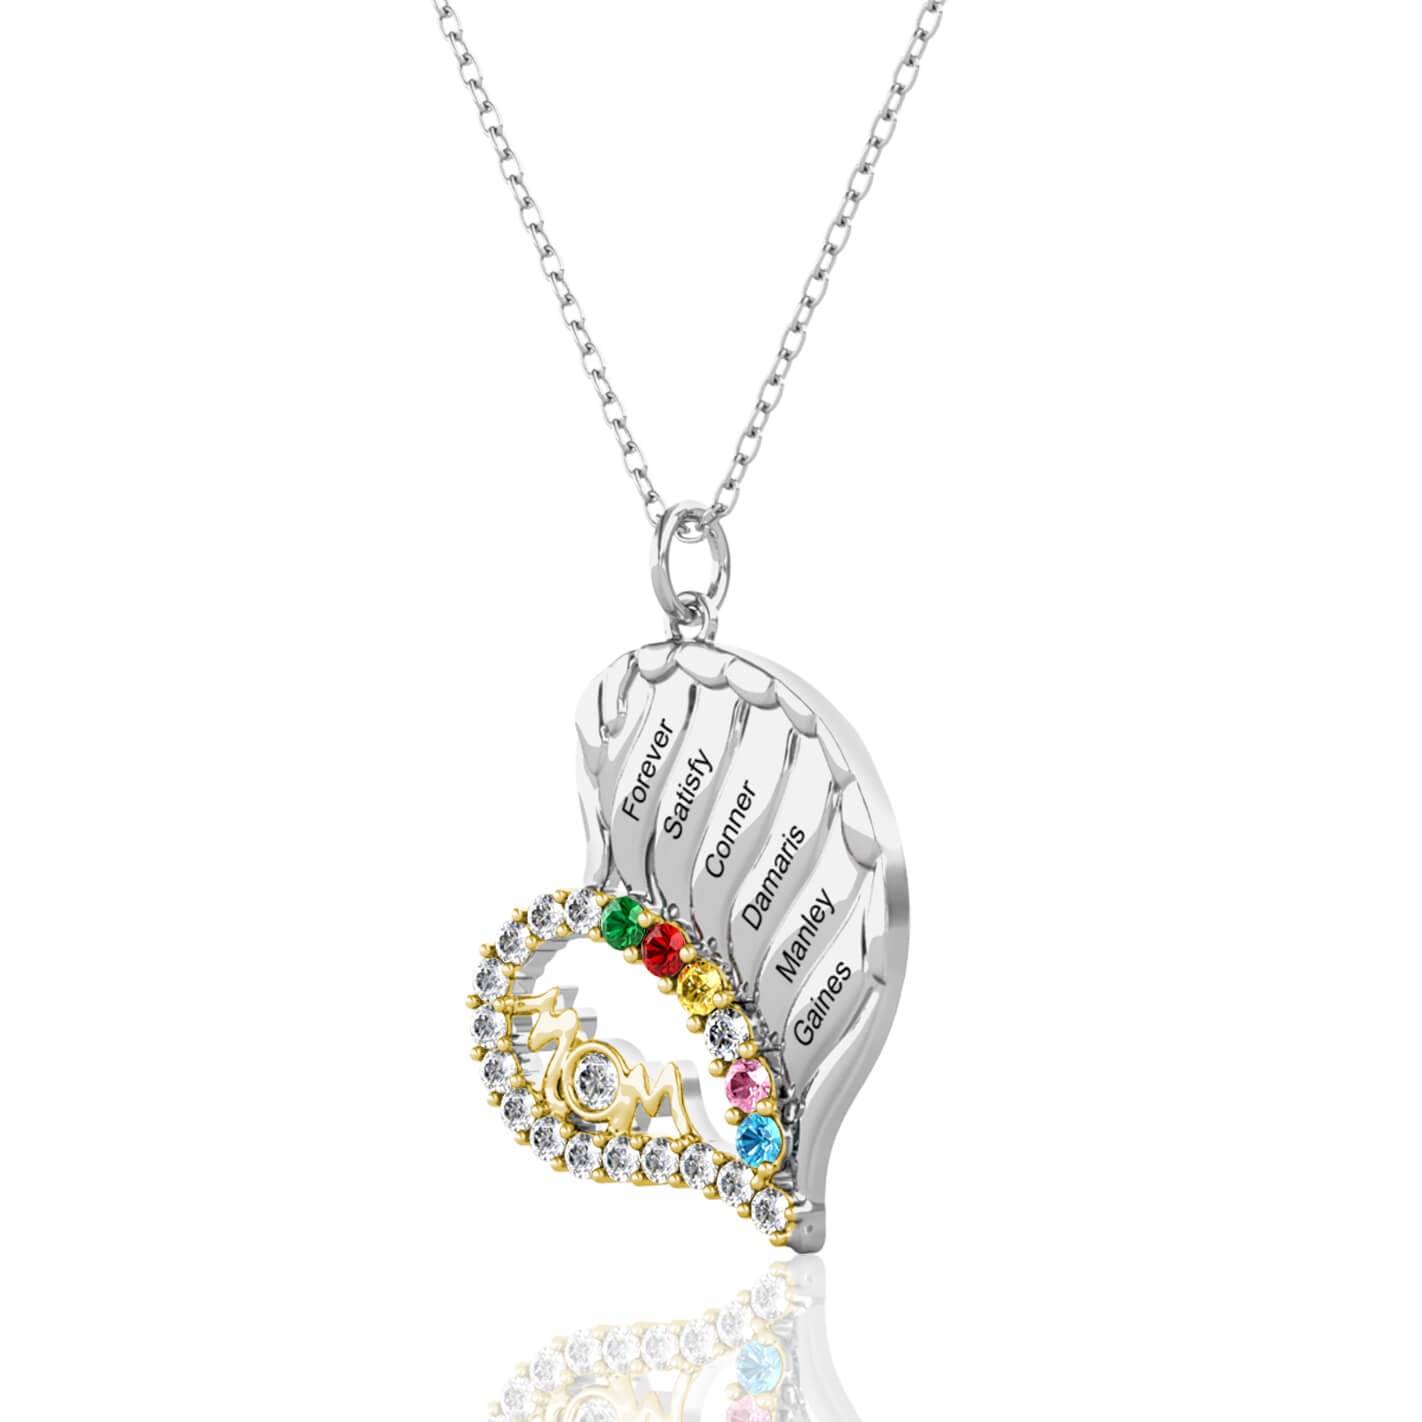 Personalised Engraved Heart Mom 6 Names Necklace with 6 Birthstones